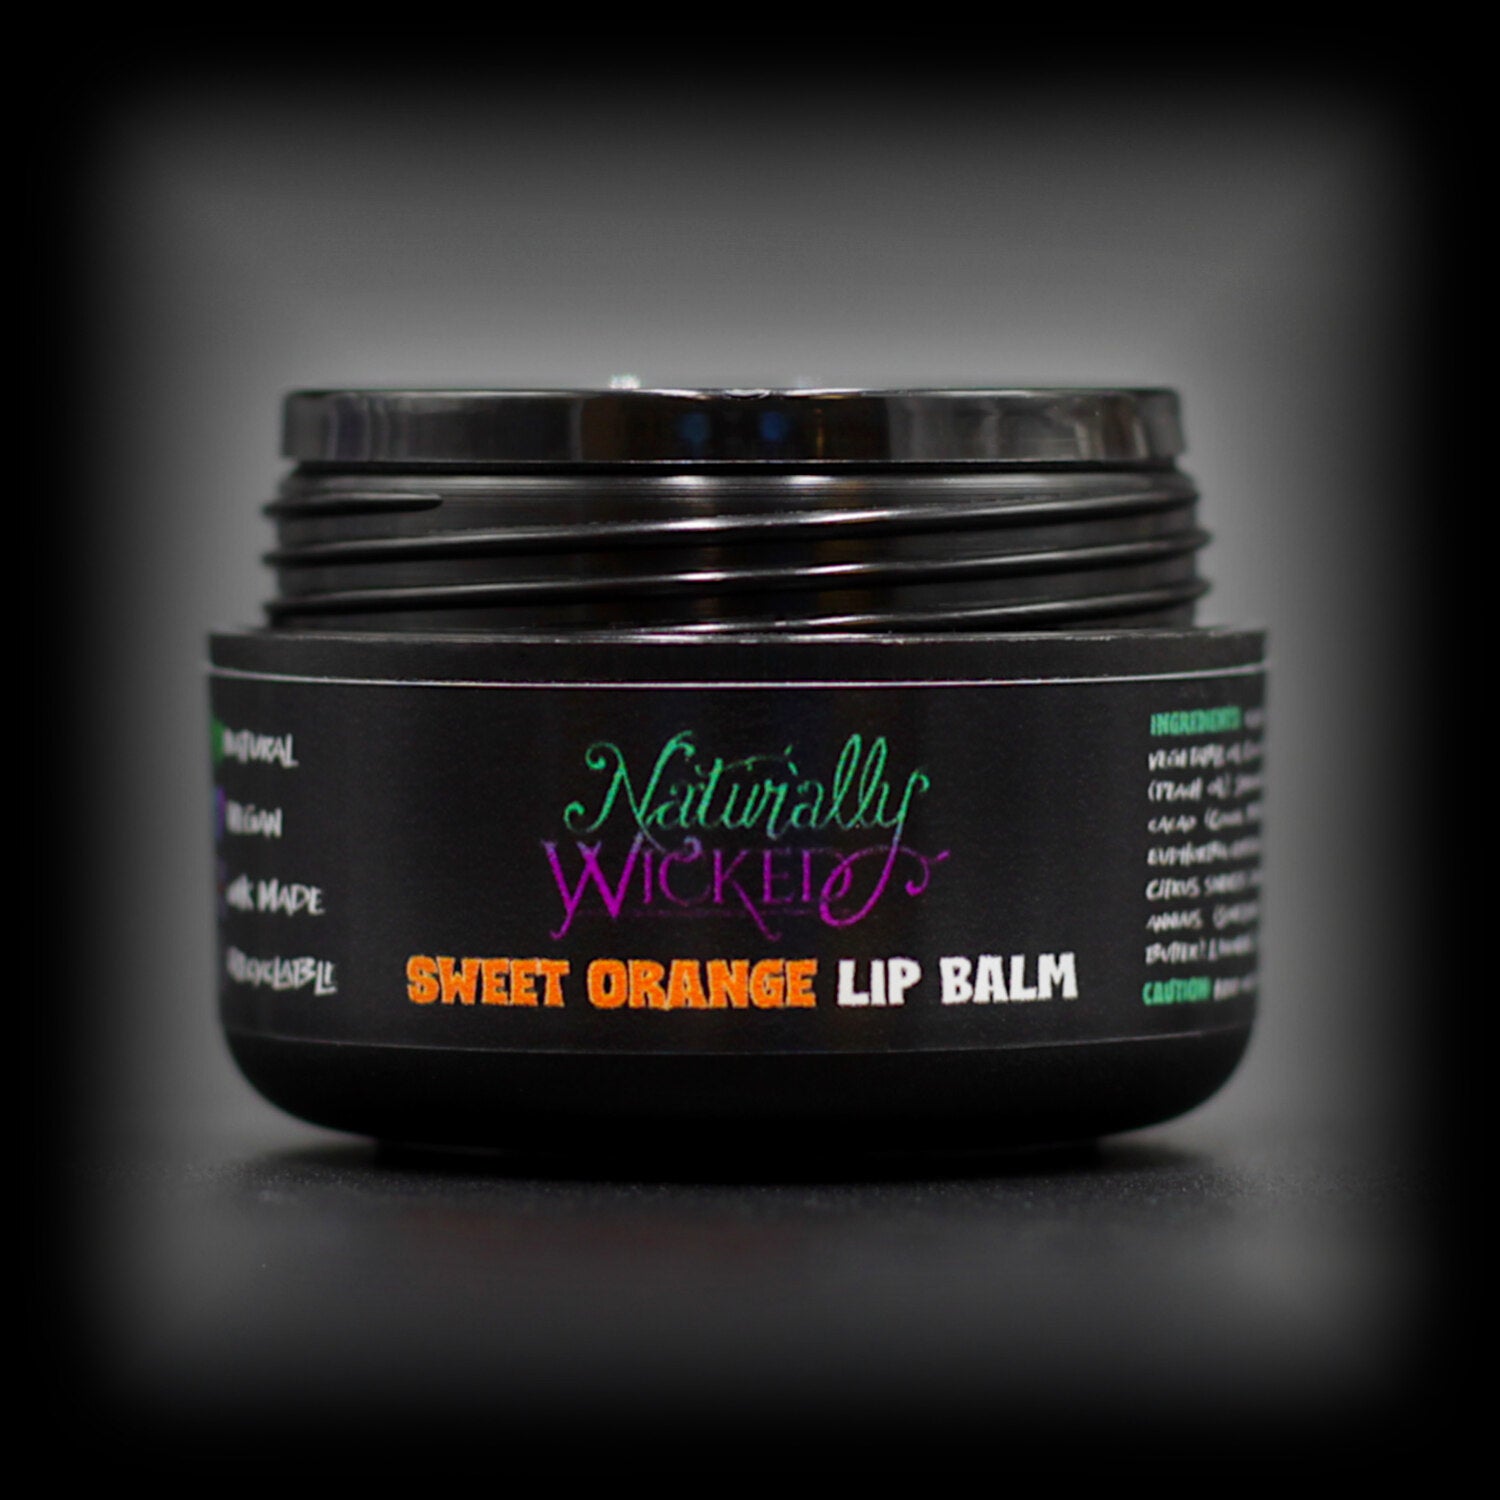 Naturally Wicked Sweet Orange Lip Balm With Lid Removed, Exposing Inner Luxury Sealing Shive